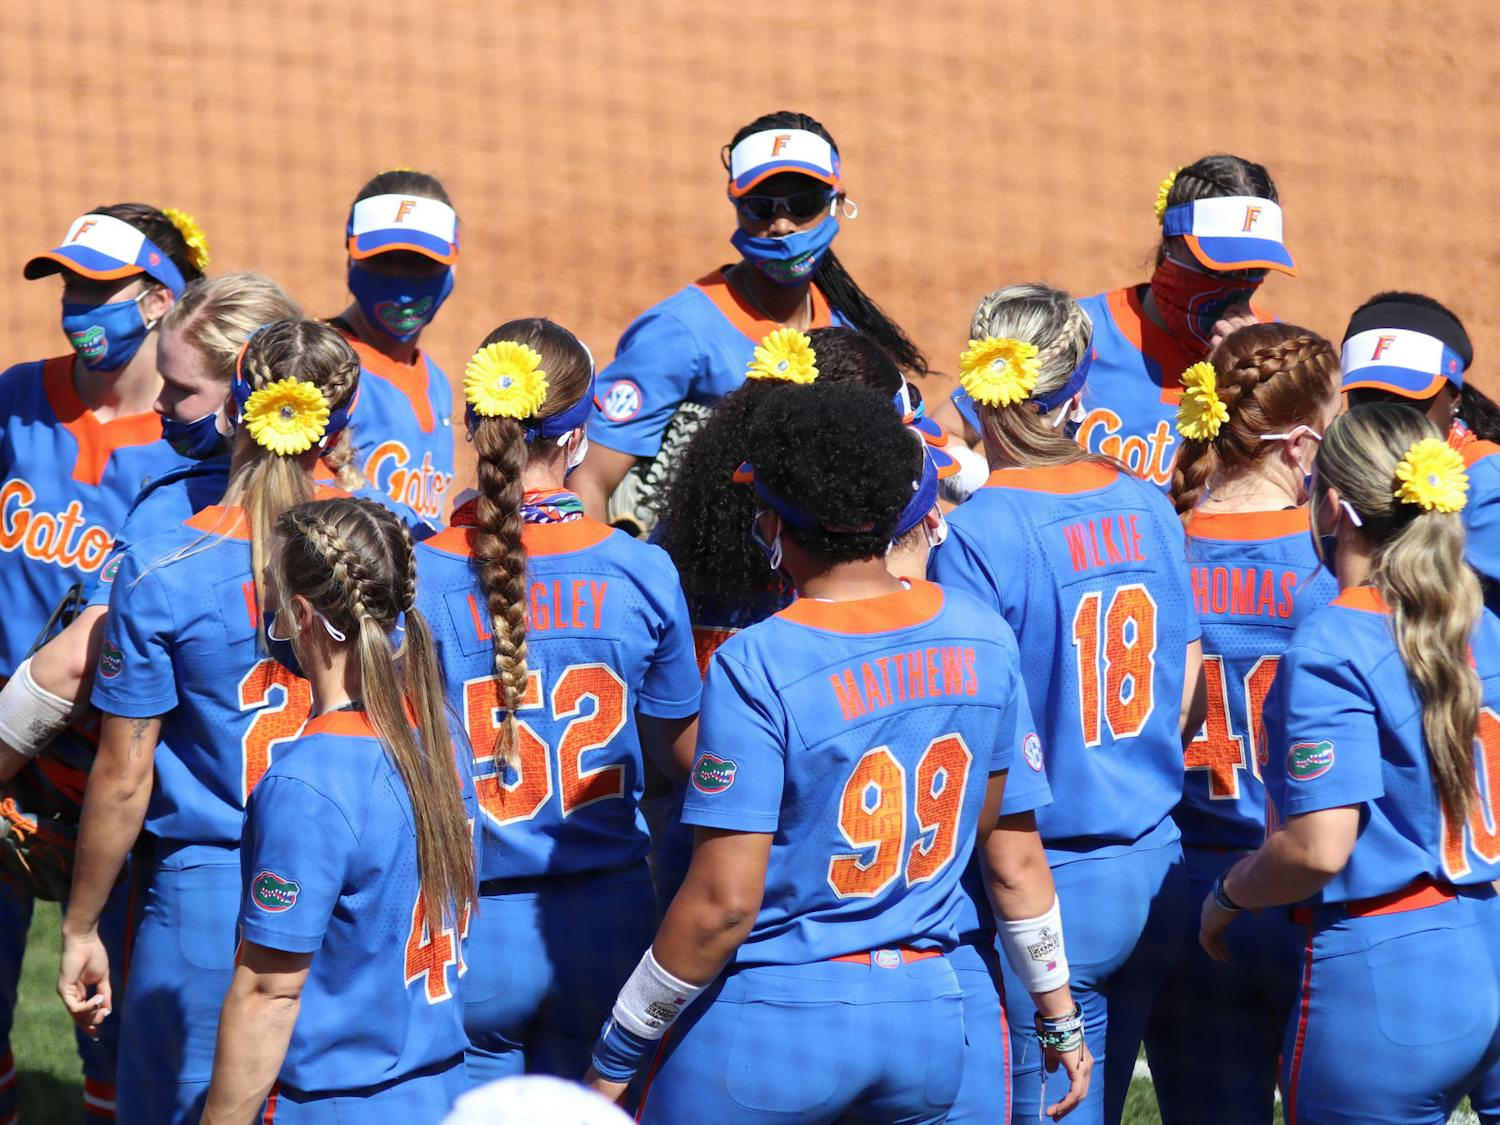 The Florida softball team during a game against Louisville Feb. 27, 2021. The Gators were edged by Mississippi State Sunday, 1-0 to drop game two of a three-game series.